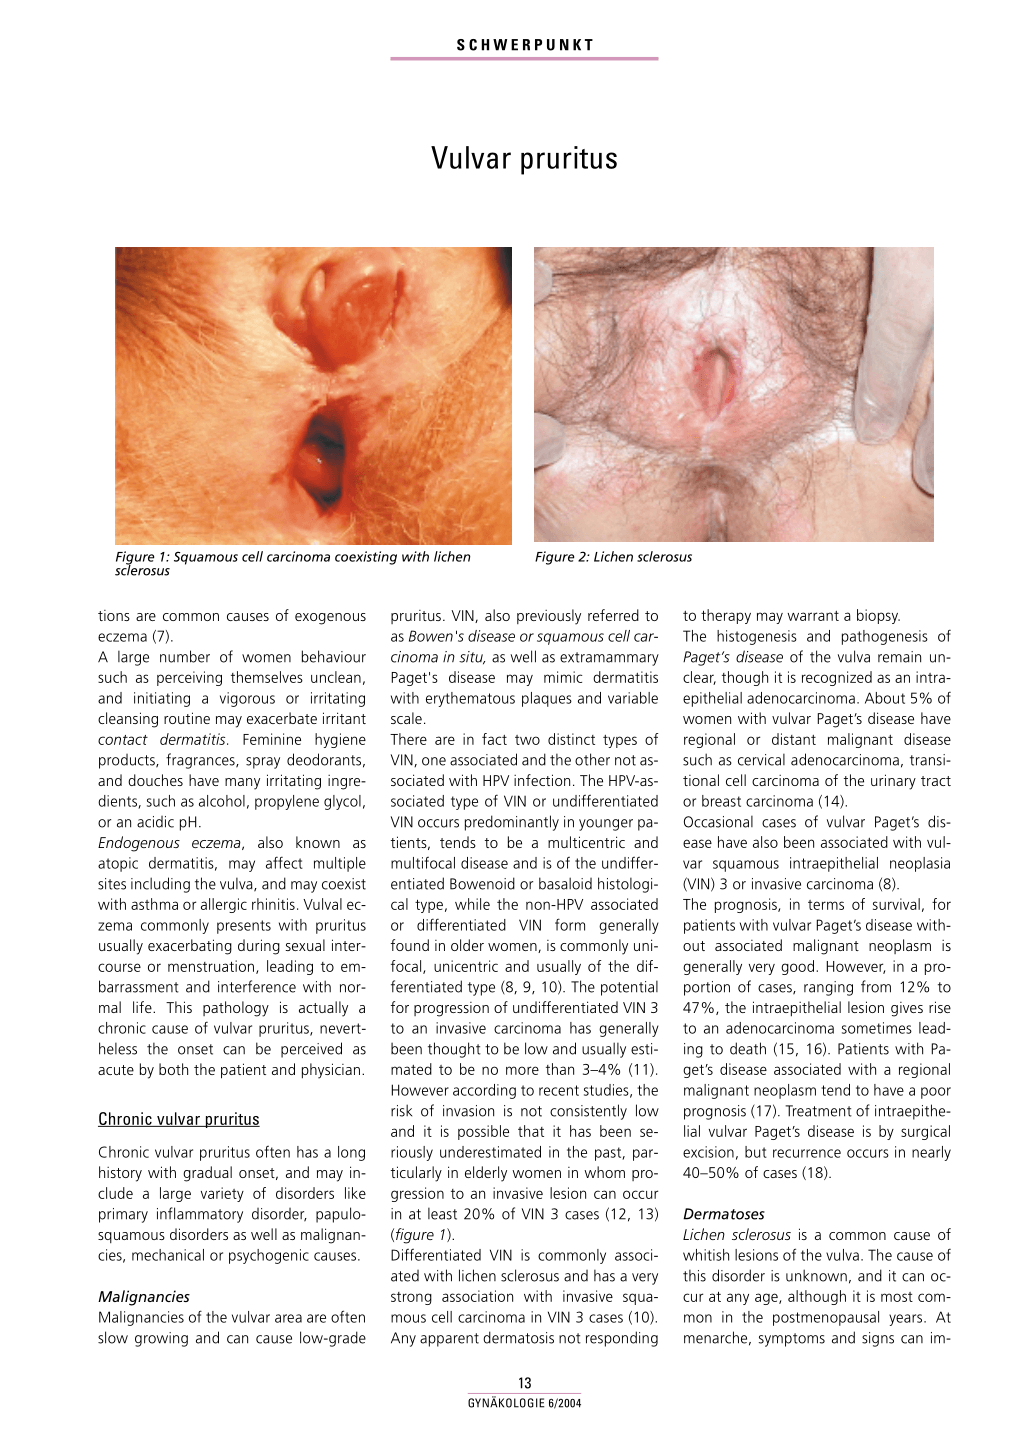 hpv impfung lichen sclerosus treatment of urinary bladder papilloma